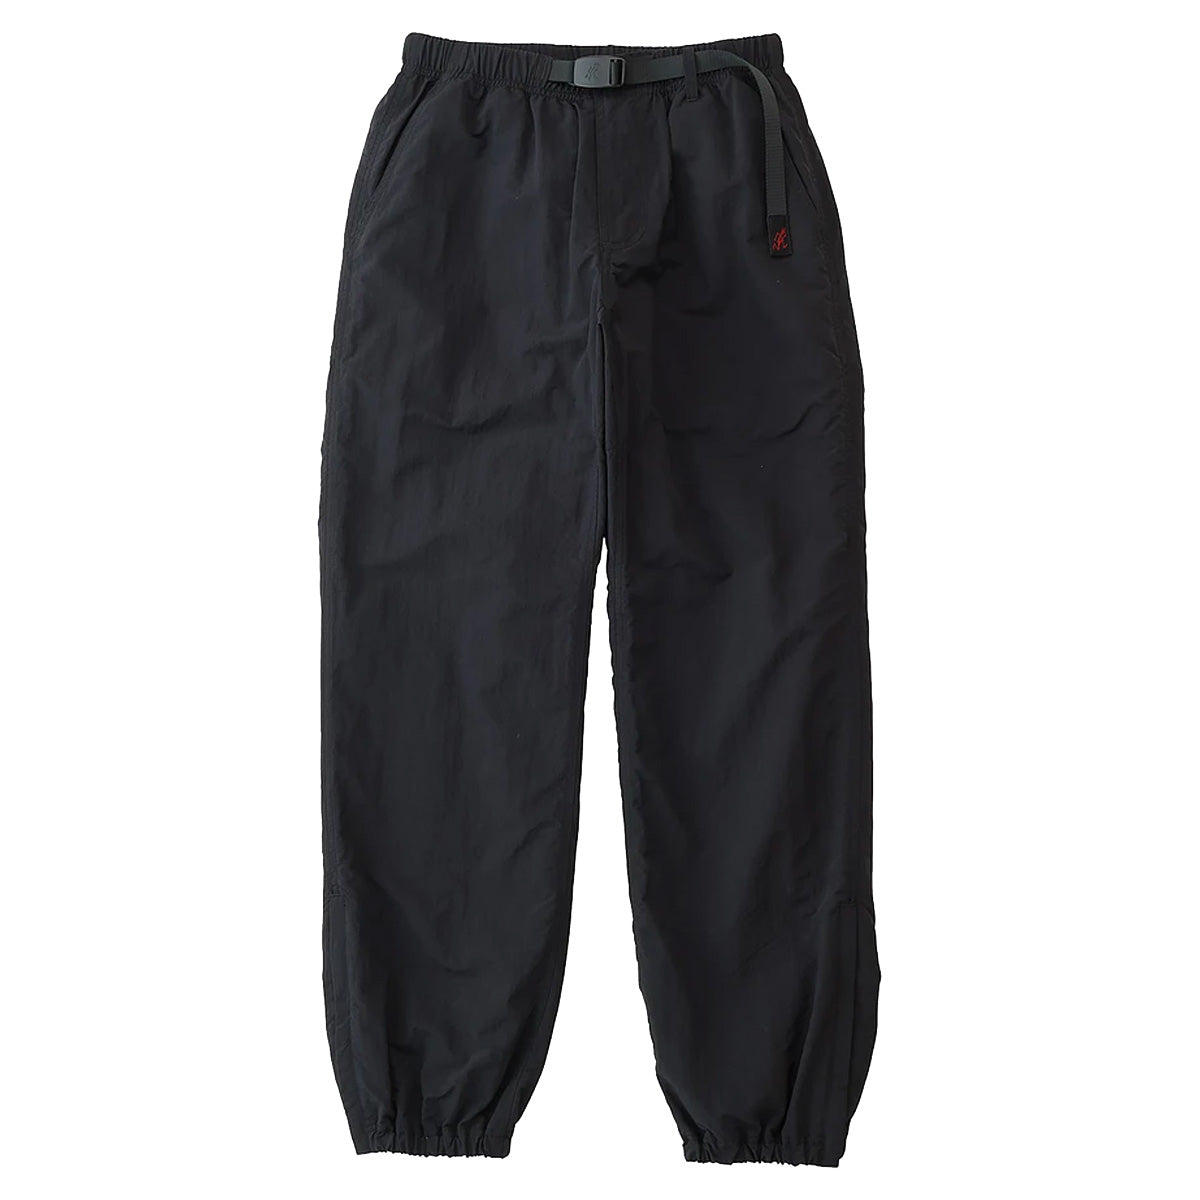 Black gramicci nylon outdoor track trousers with adjustable waist. Free uk shipping over £50